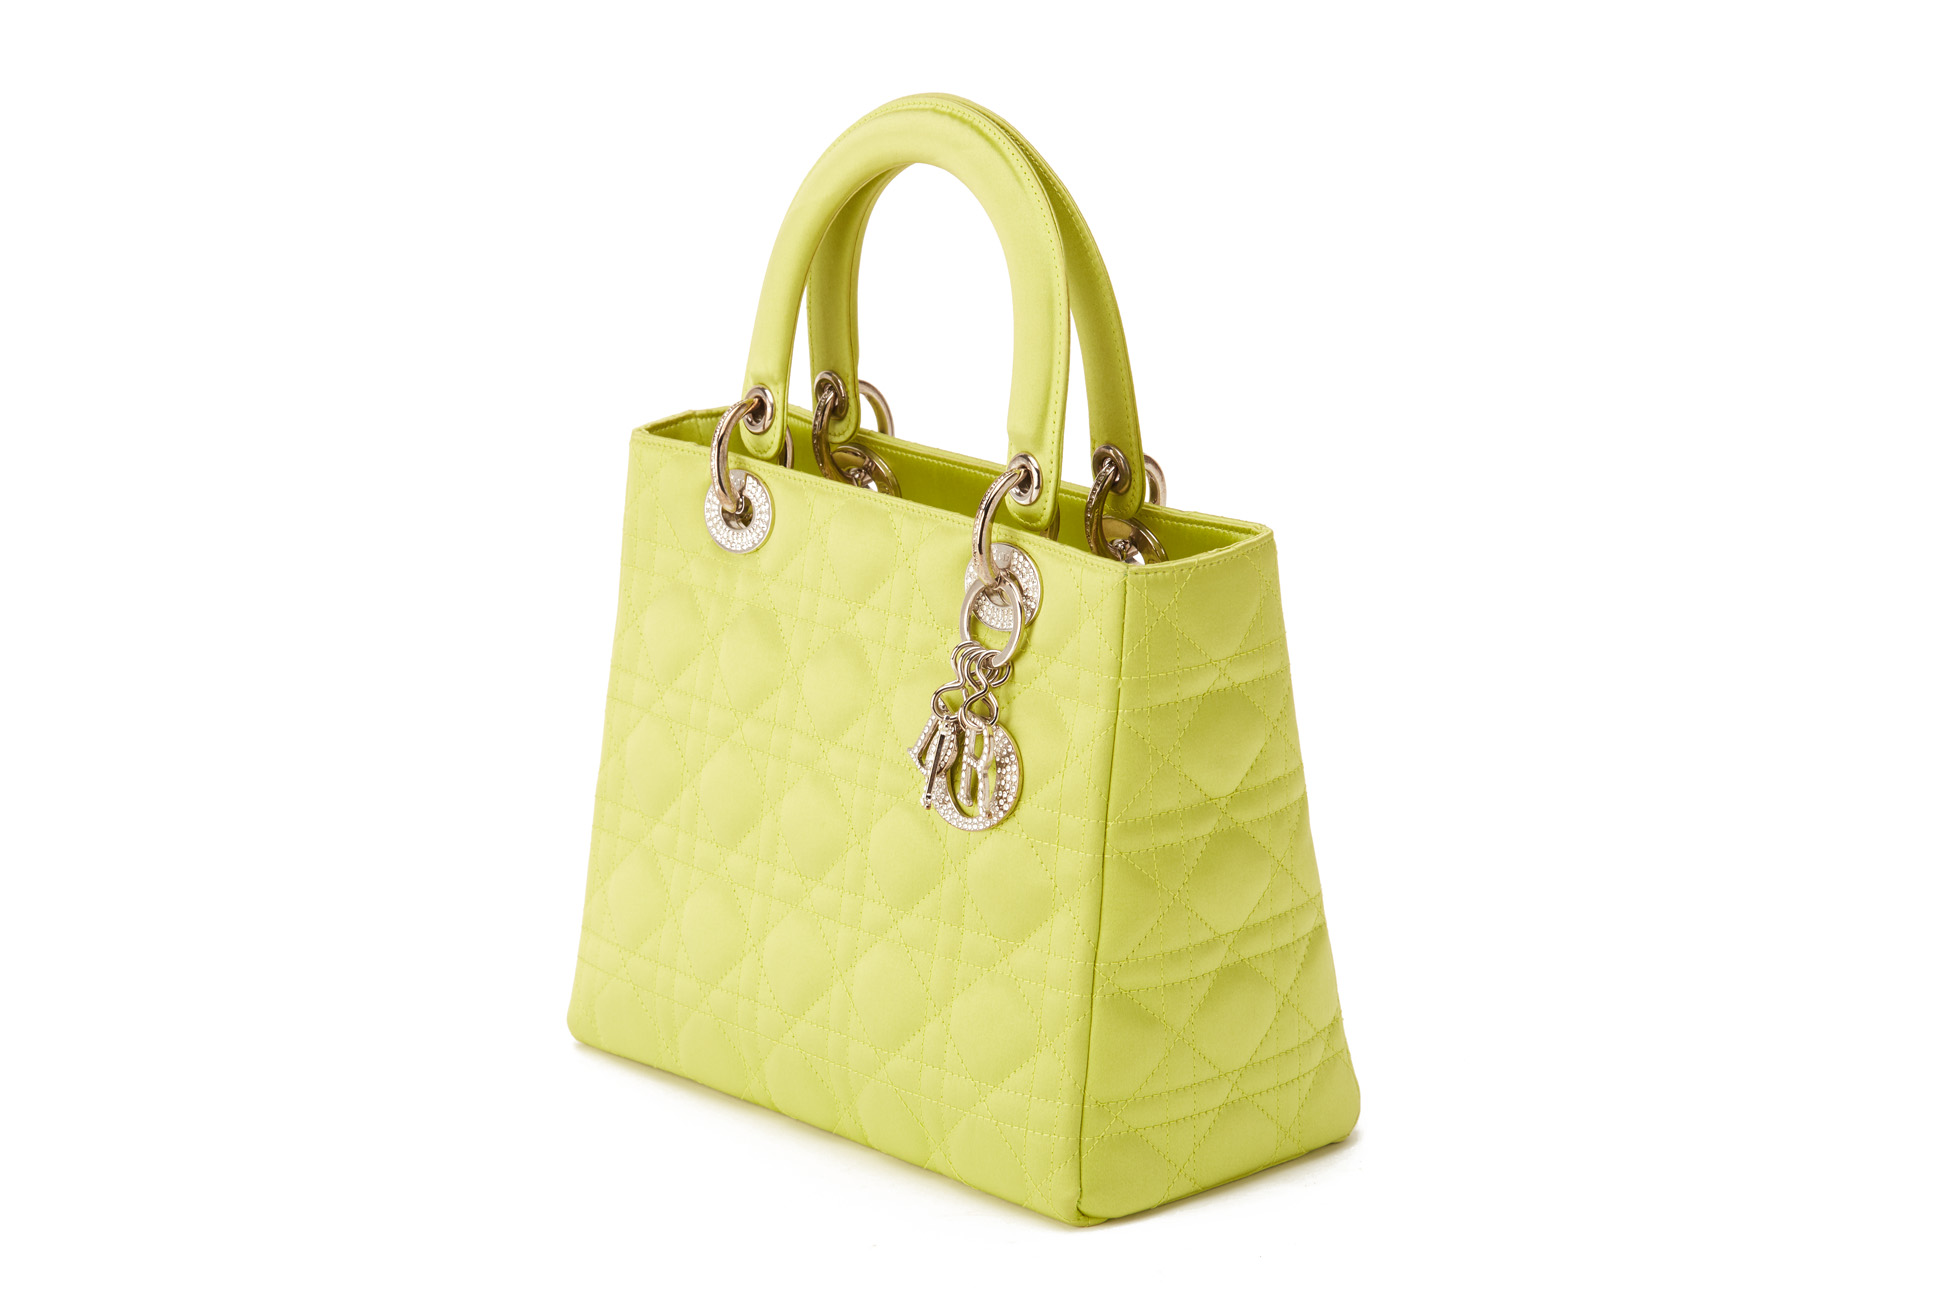 A CHRISTIAN DIOR QUILTED GREEN SATIN MEDIUM LADY DIOR - Image 3 of 6